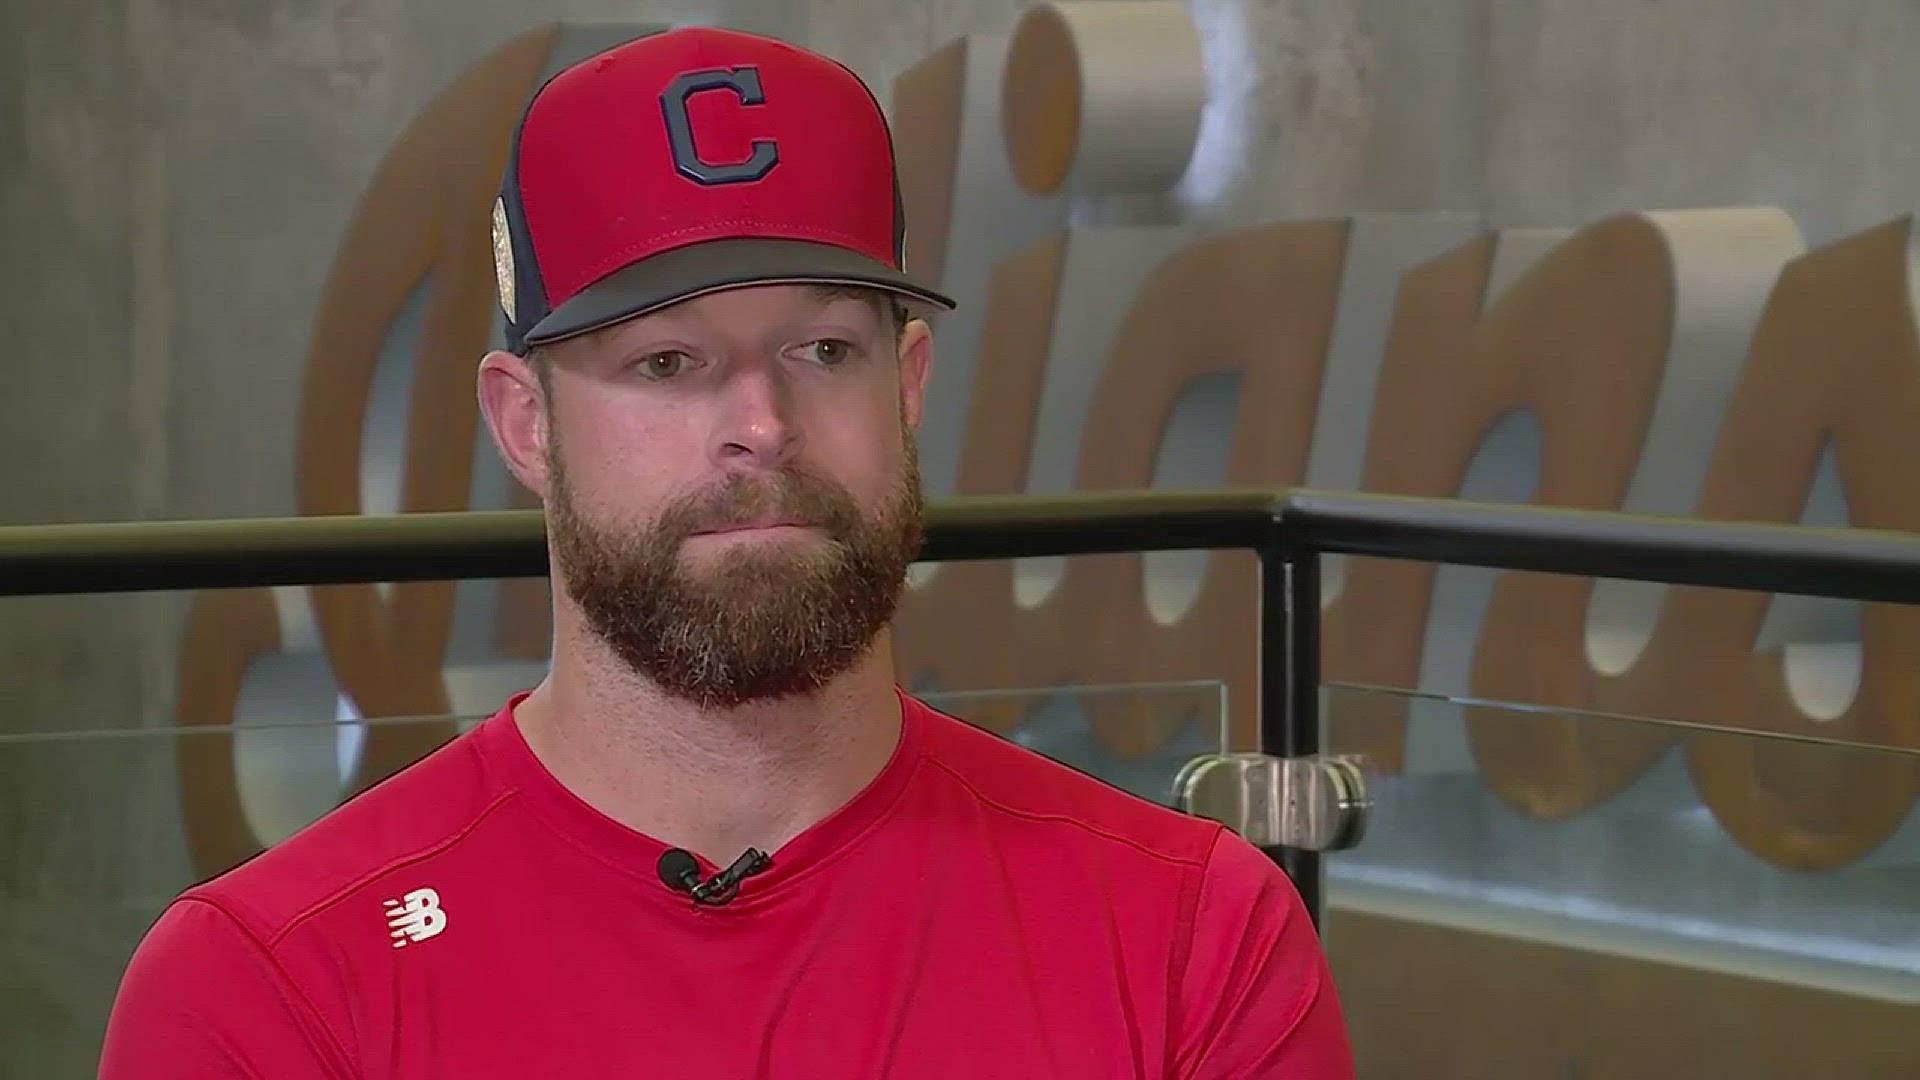 Cleveland Indians P Corey Kluber goes one-on-one with WKYC's Dave Chudowsky